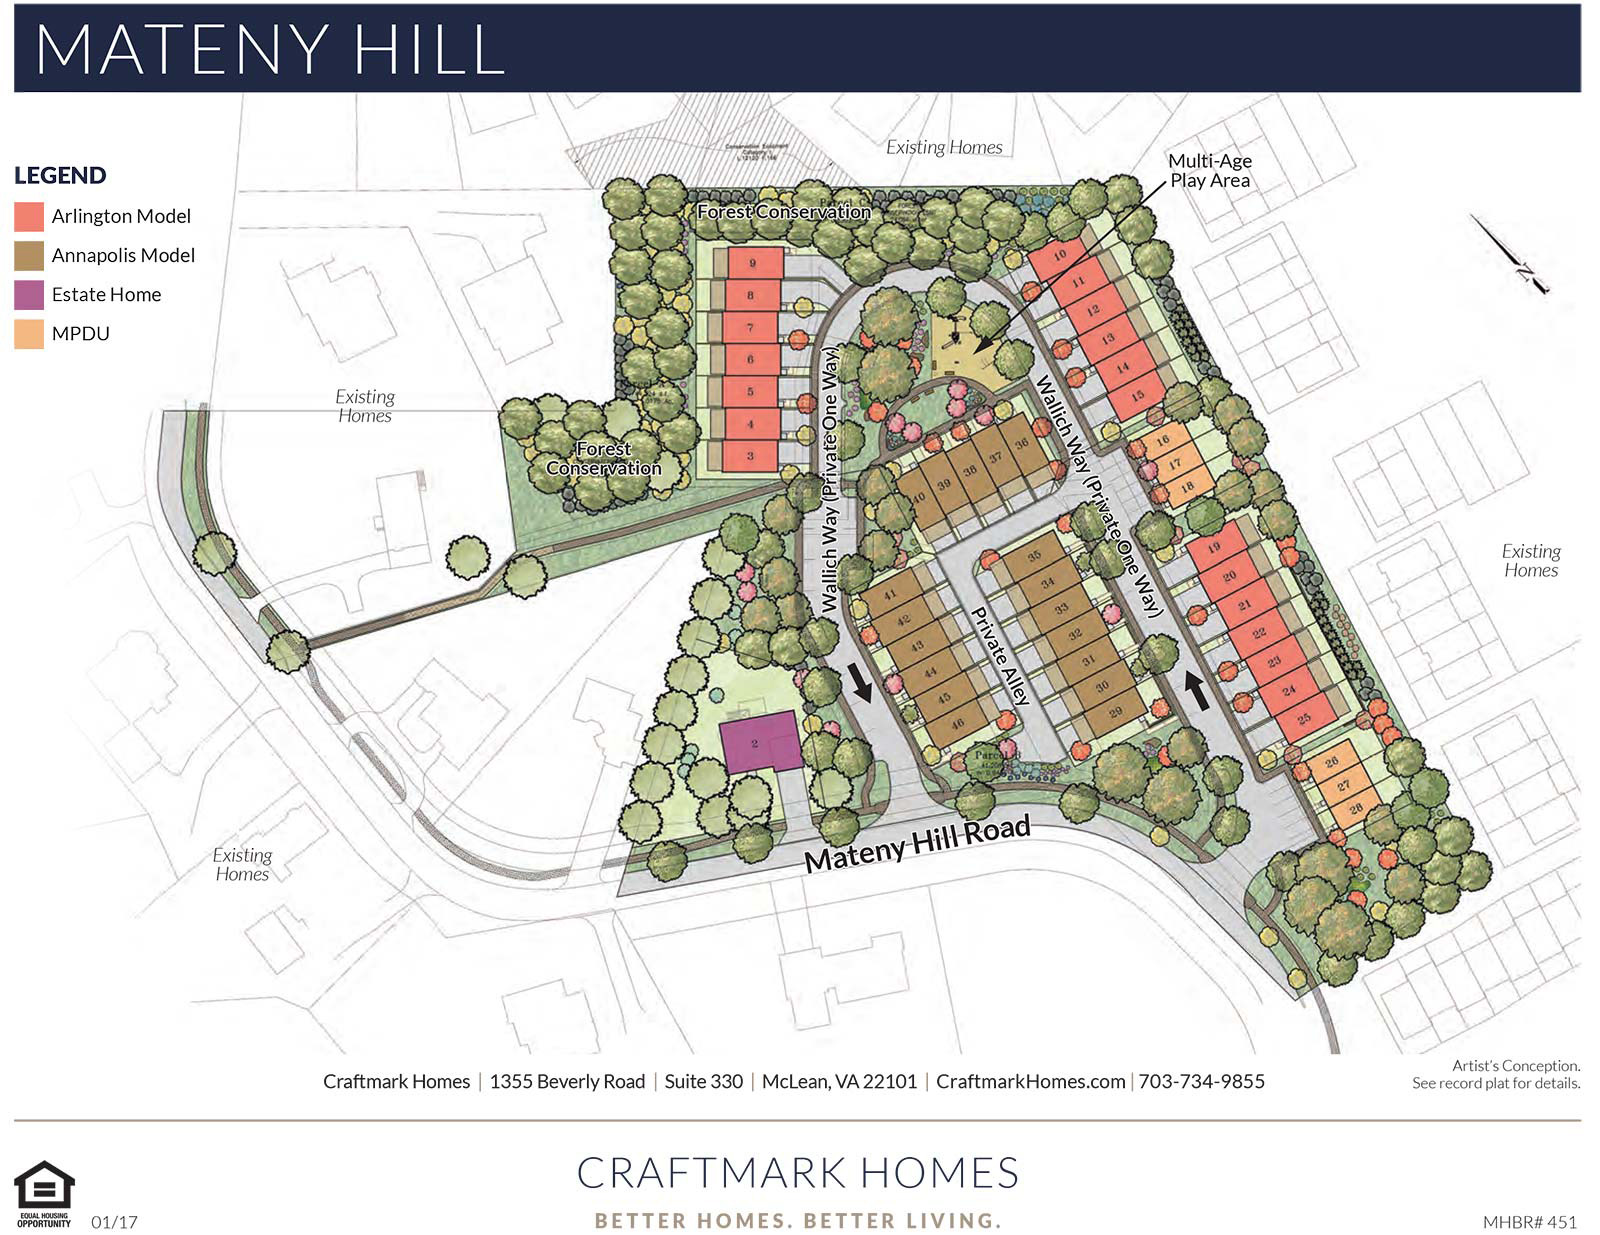 Mateny Hill Site Plan, Townhomes in Germantown MD, Craftmark Homes